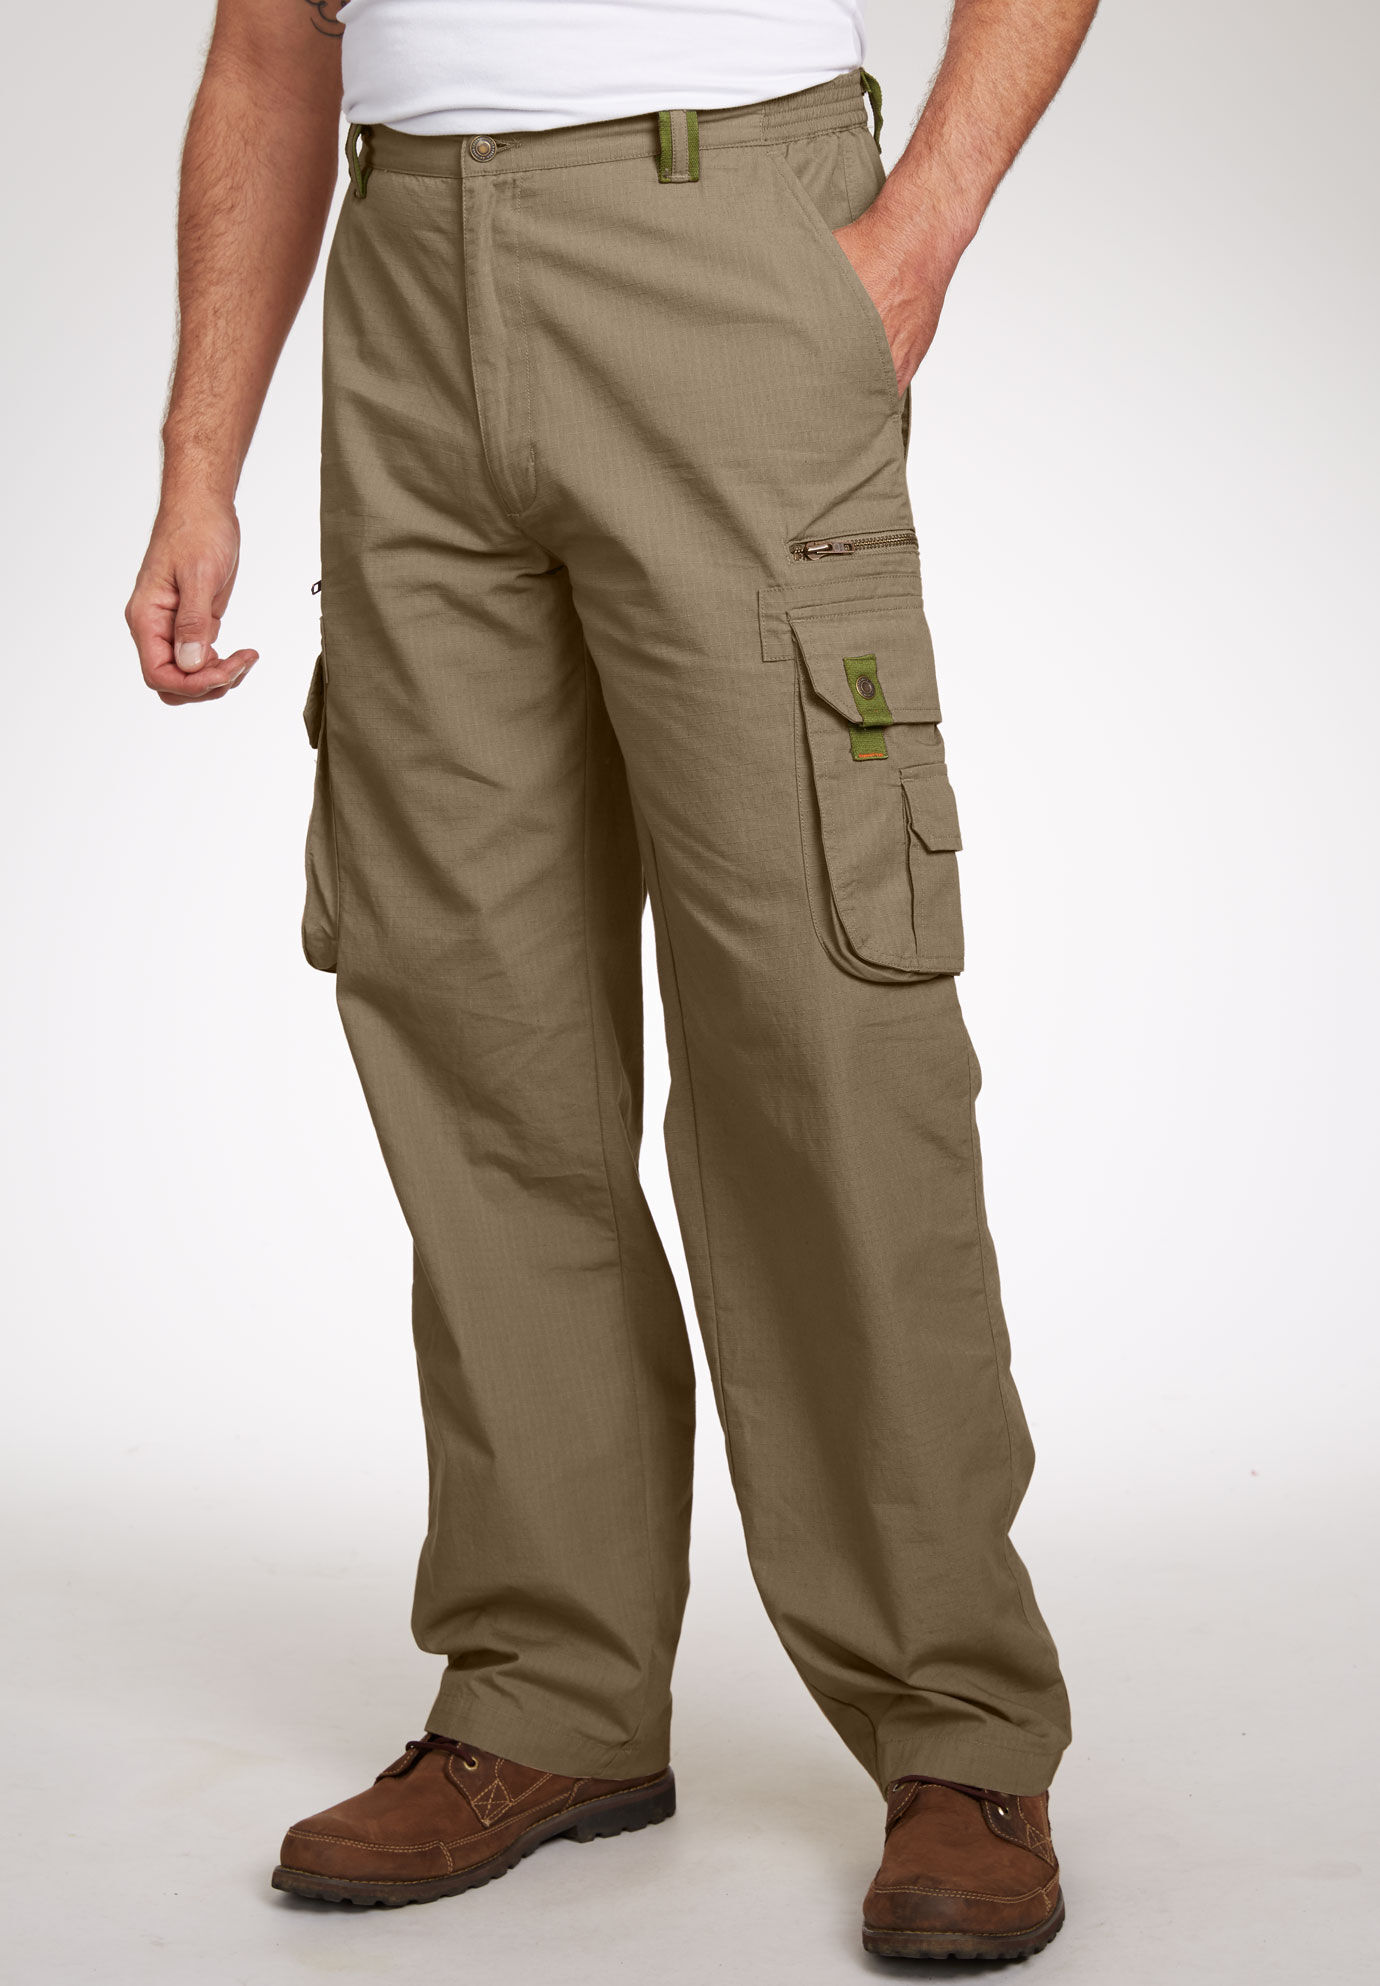 big and tall cargo pants near me